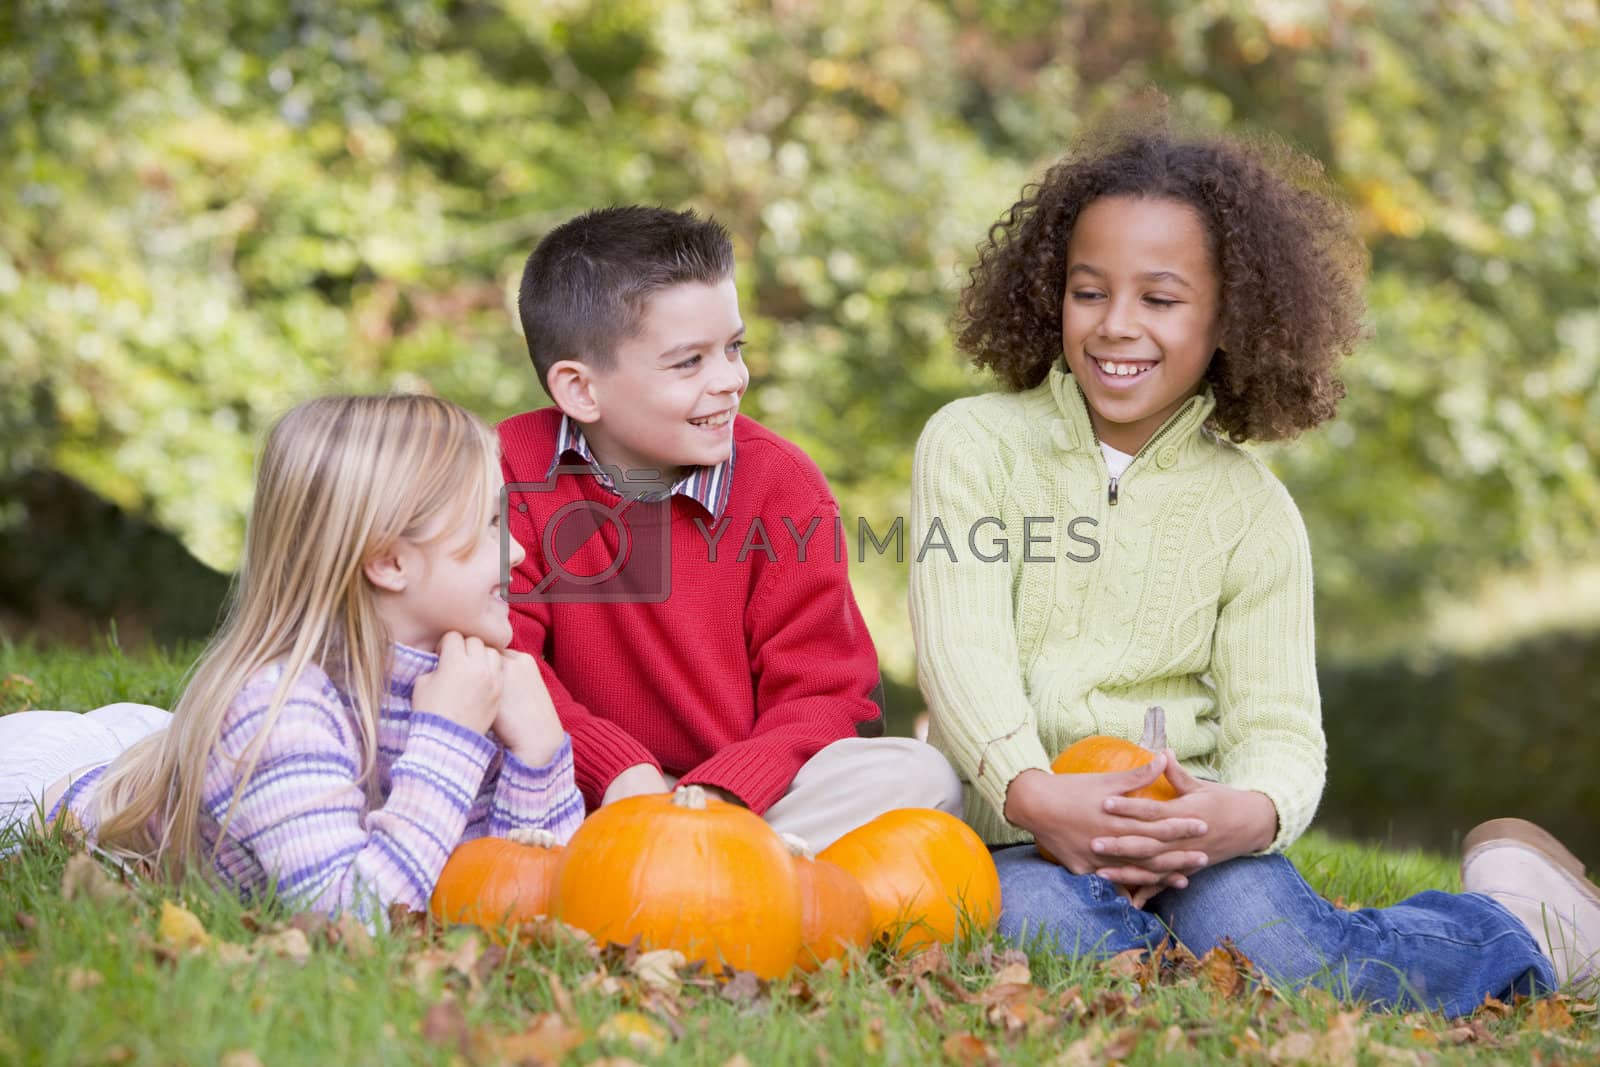 Royalty free image of Three young friends sitting on grass with pumpkins smiling by MonkeyBusiness